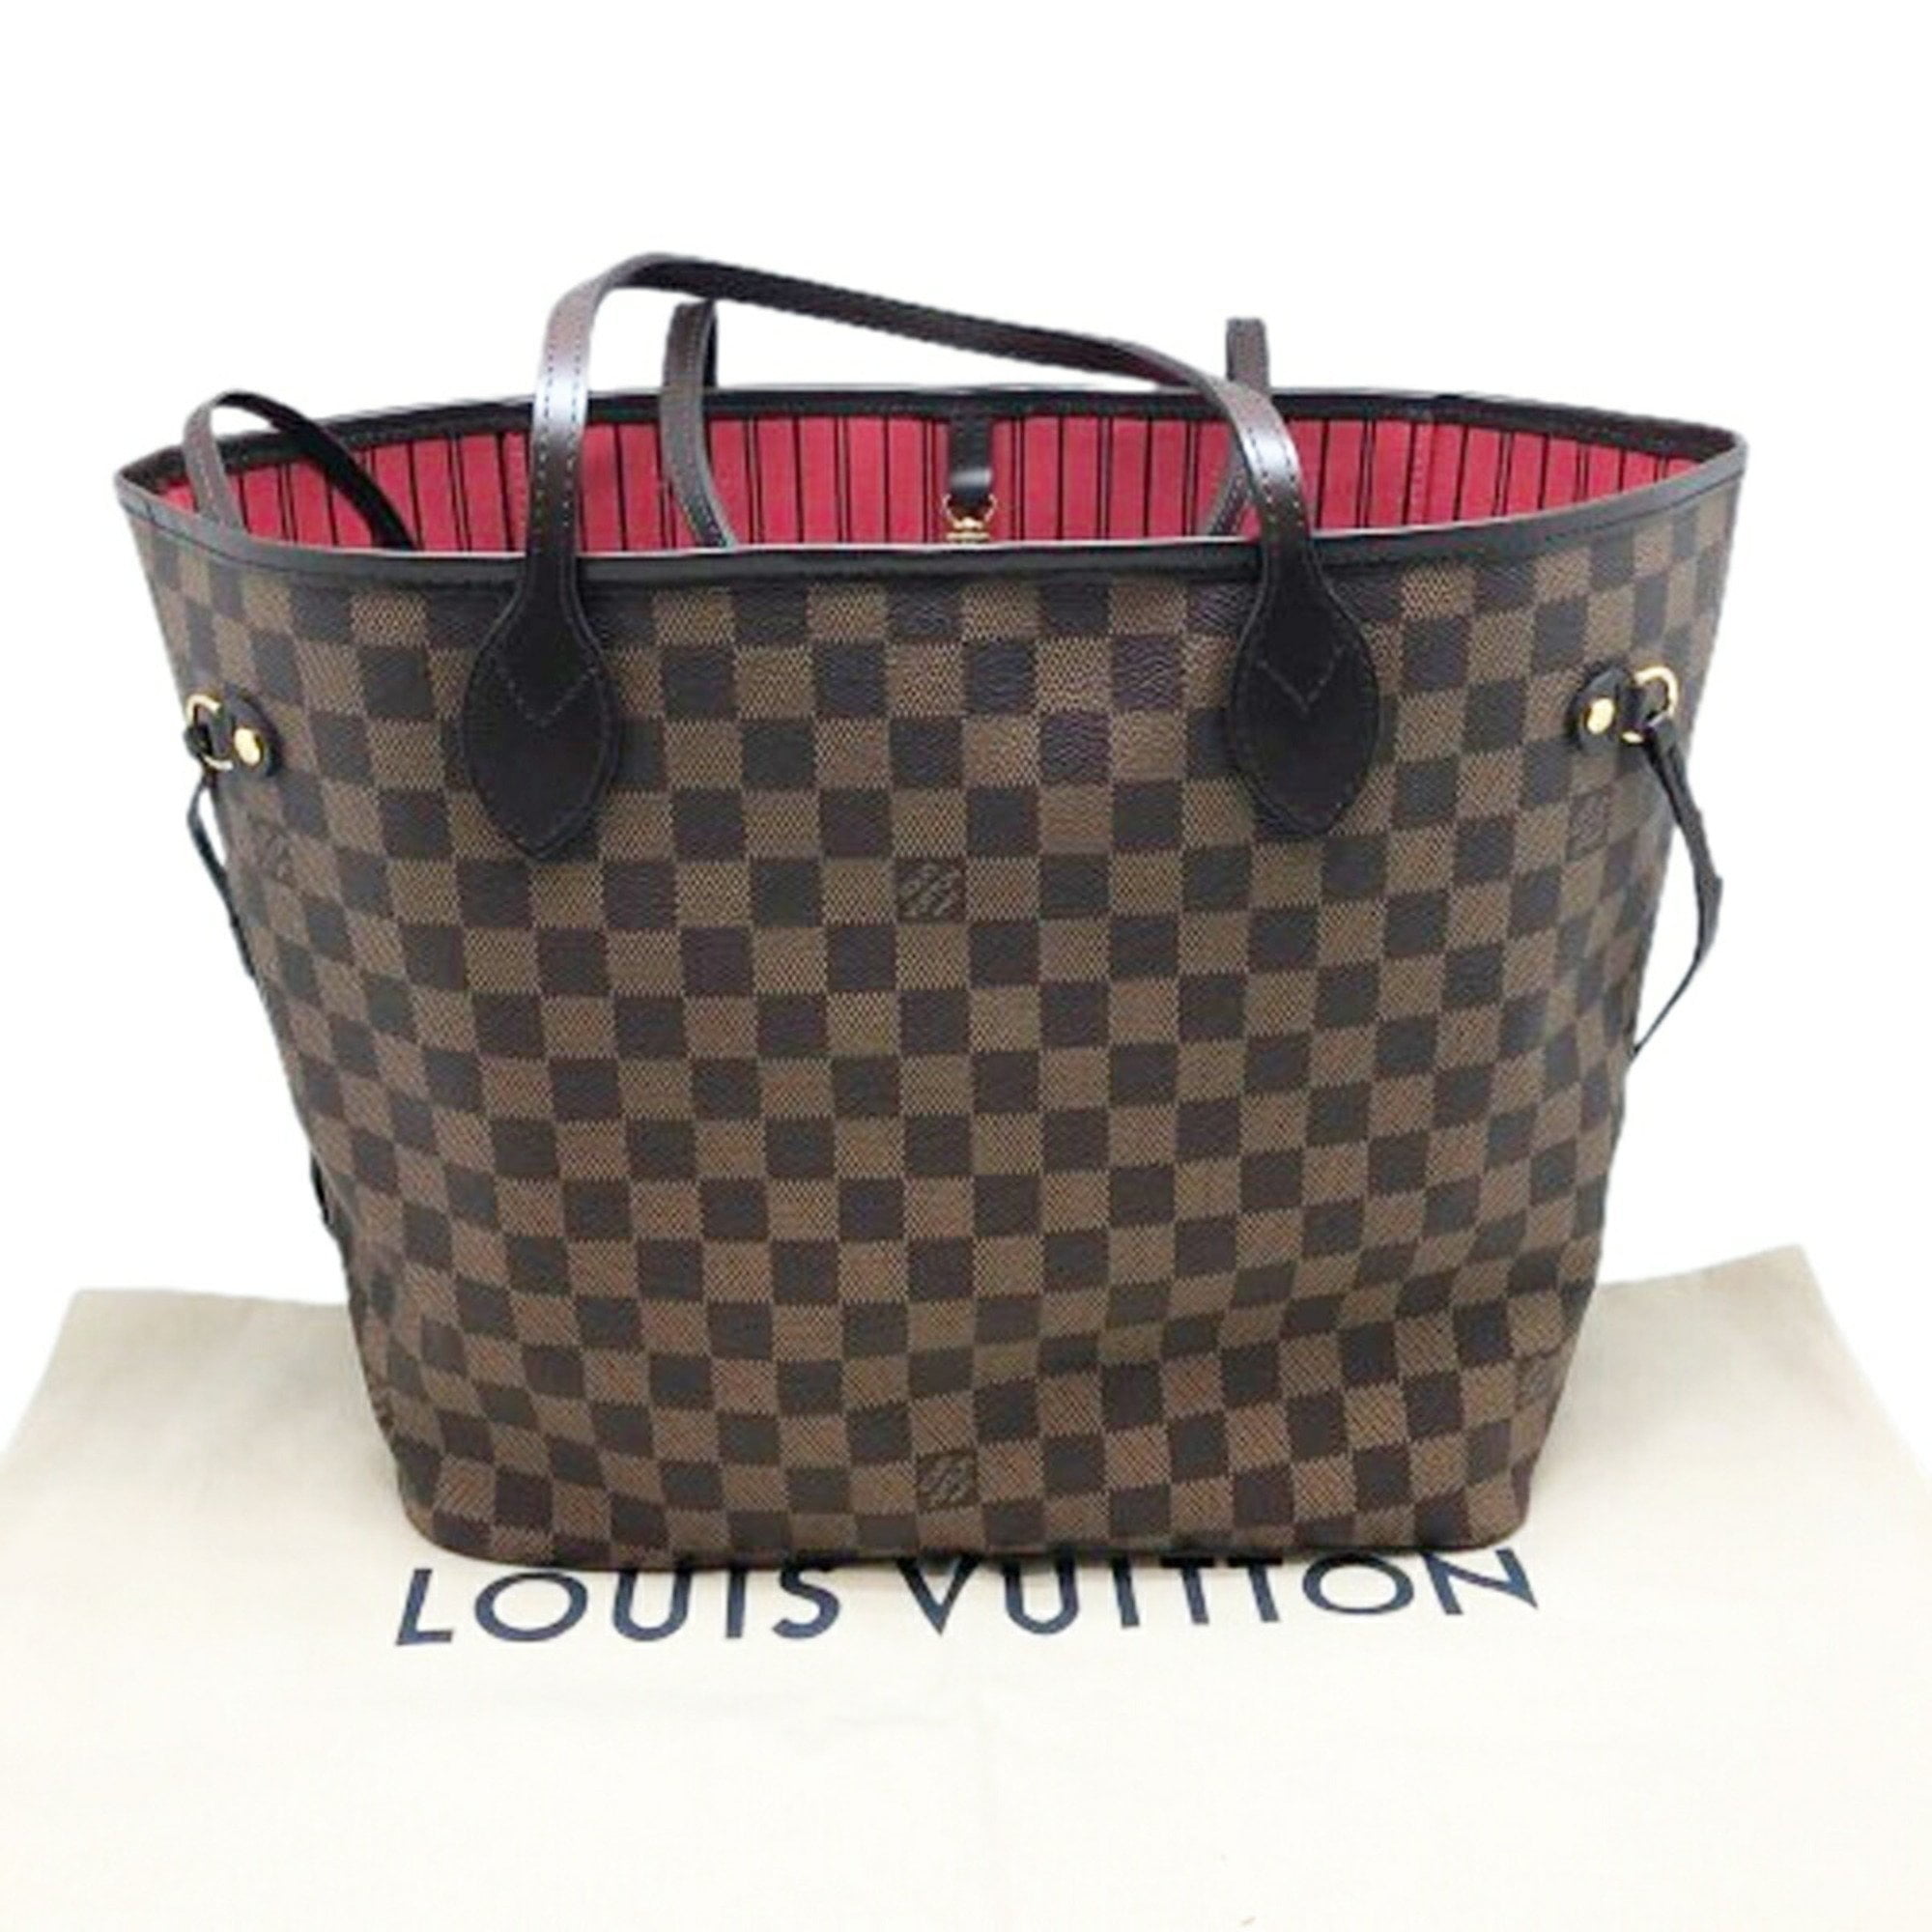 Authenticated Used LOUIS VUITTON Louis Vuitton Neverfull MM N41358